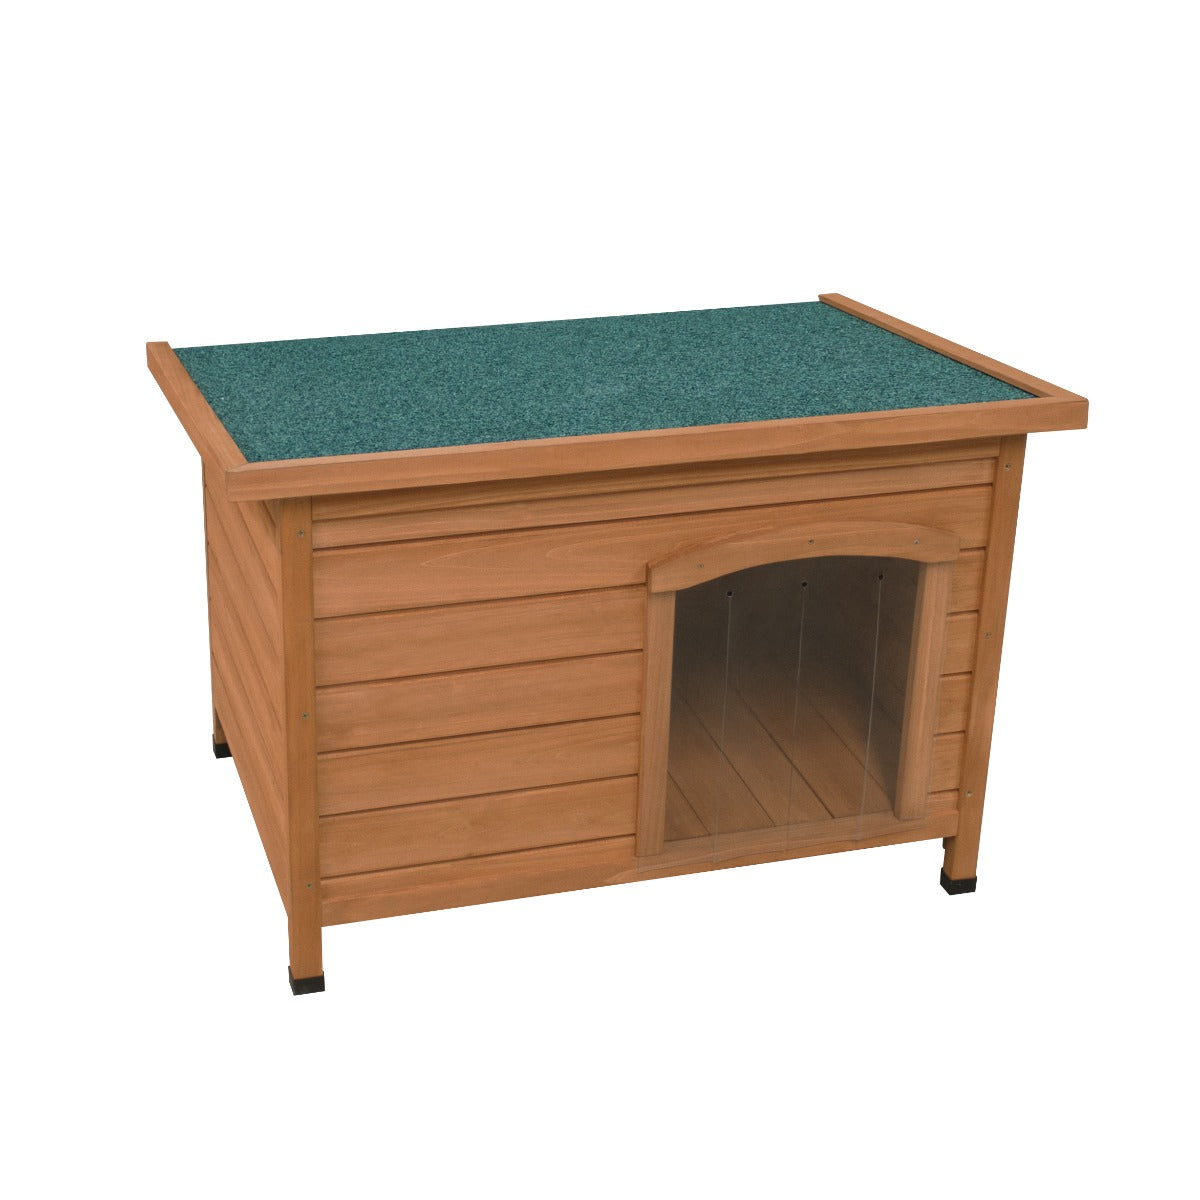 Dog Kennel - Small